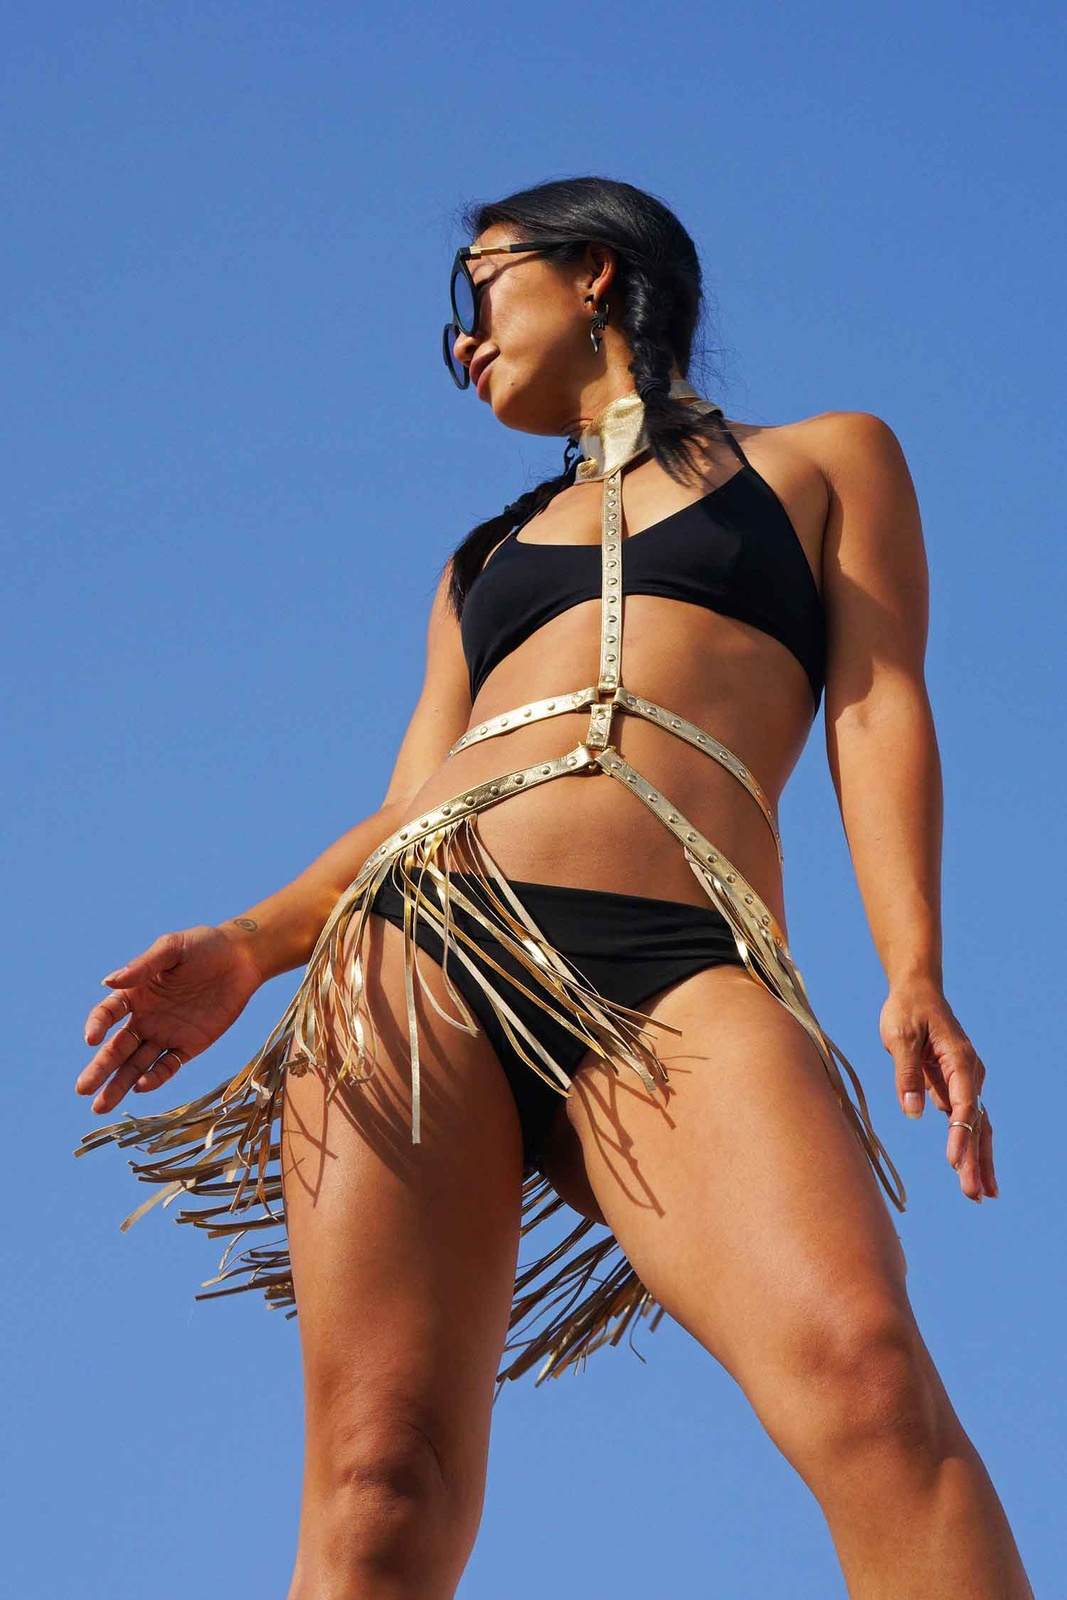 Narnia Womens Gold Leather Body Harness with leather tassel belt skirt from Love Khaos Festival Clothing brand.